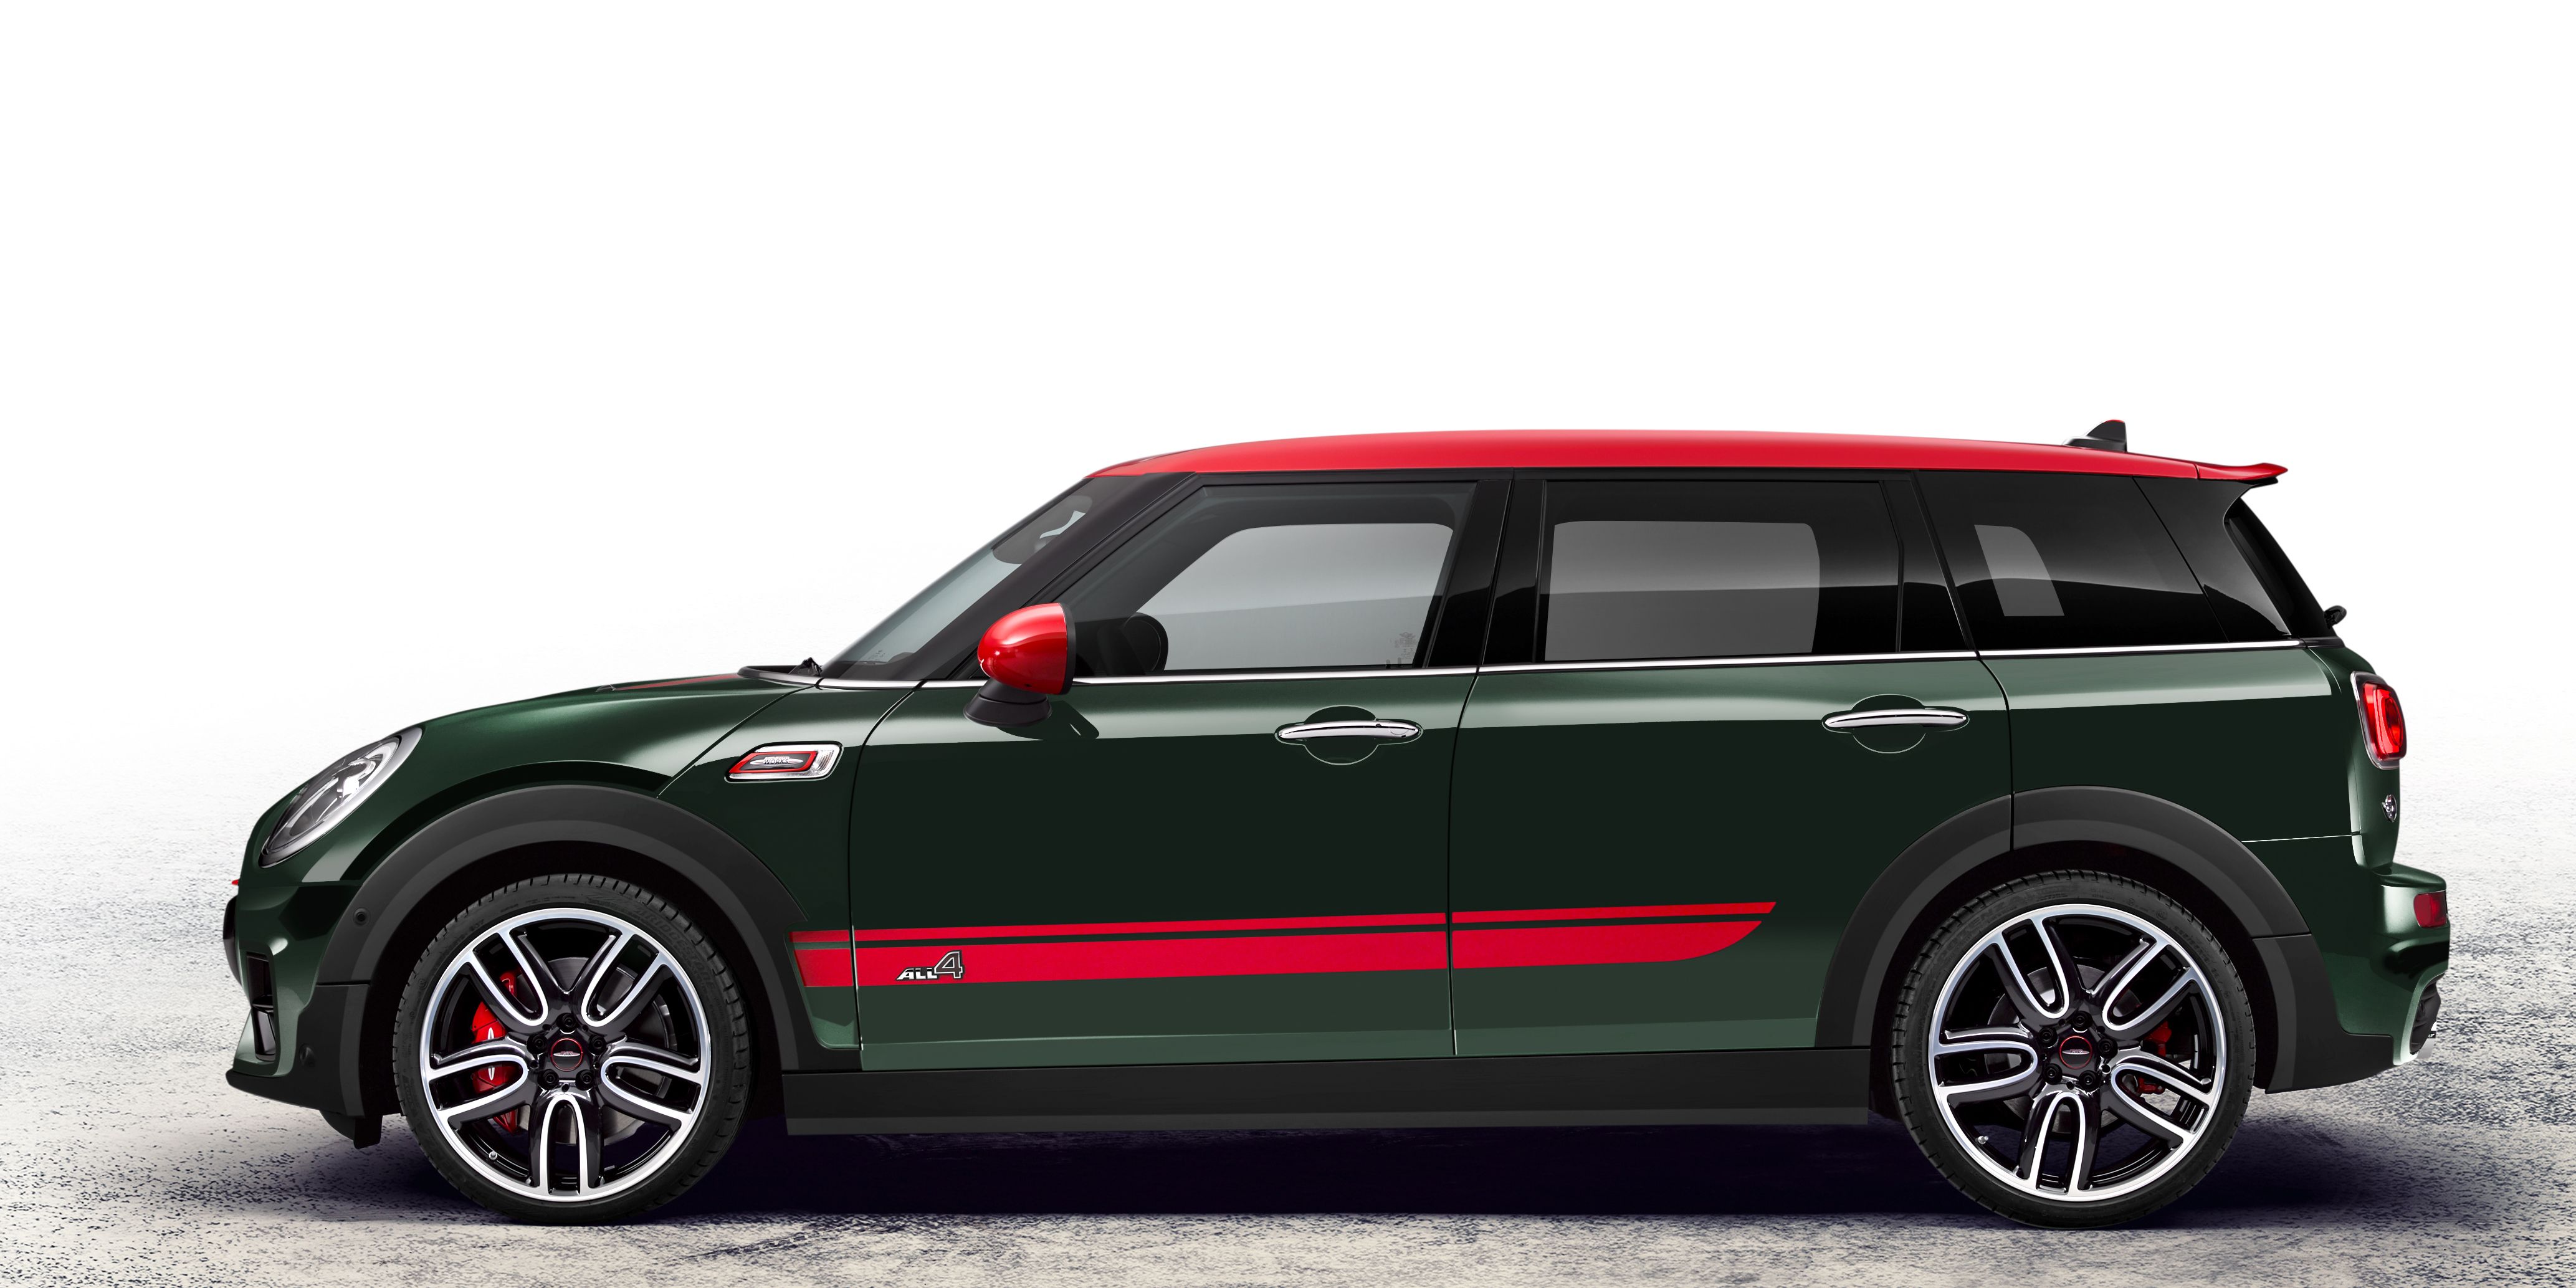 2017 Mini John Cooper Works Clubman - Official Photos and Specifications